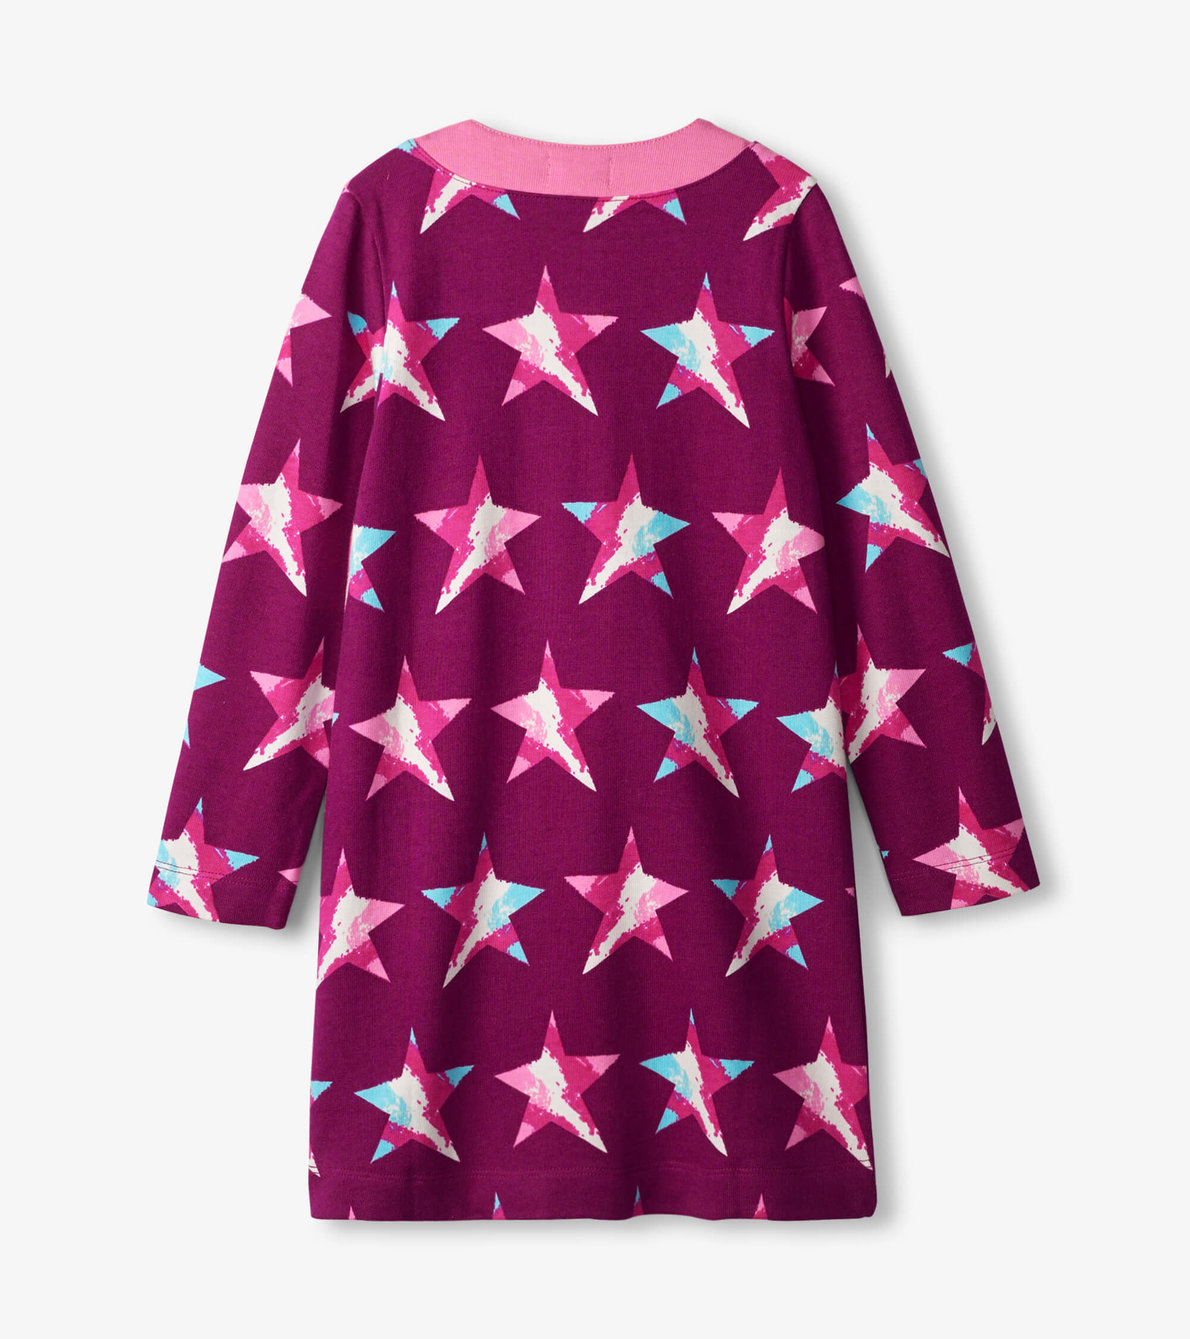 View larger image of Star Cluster Mod Dress